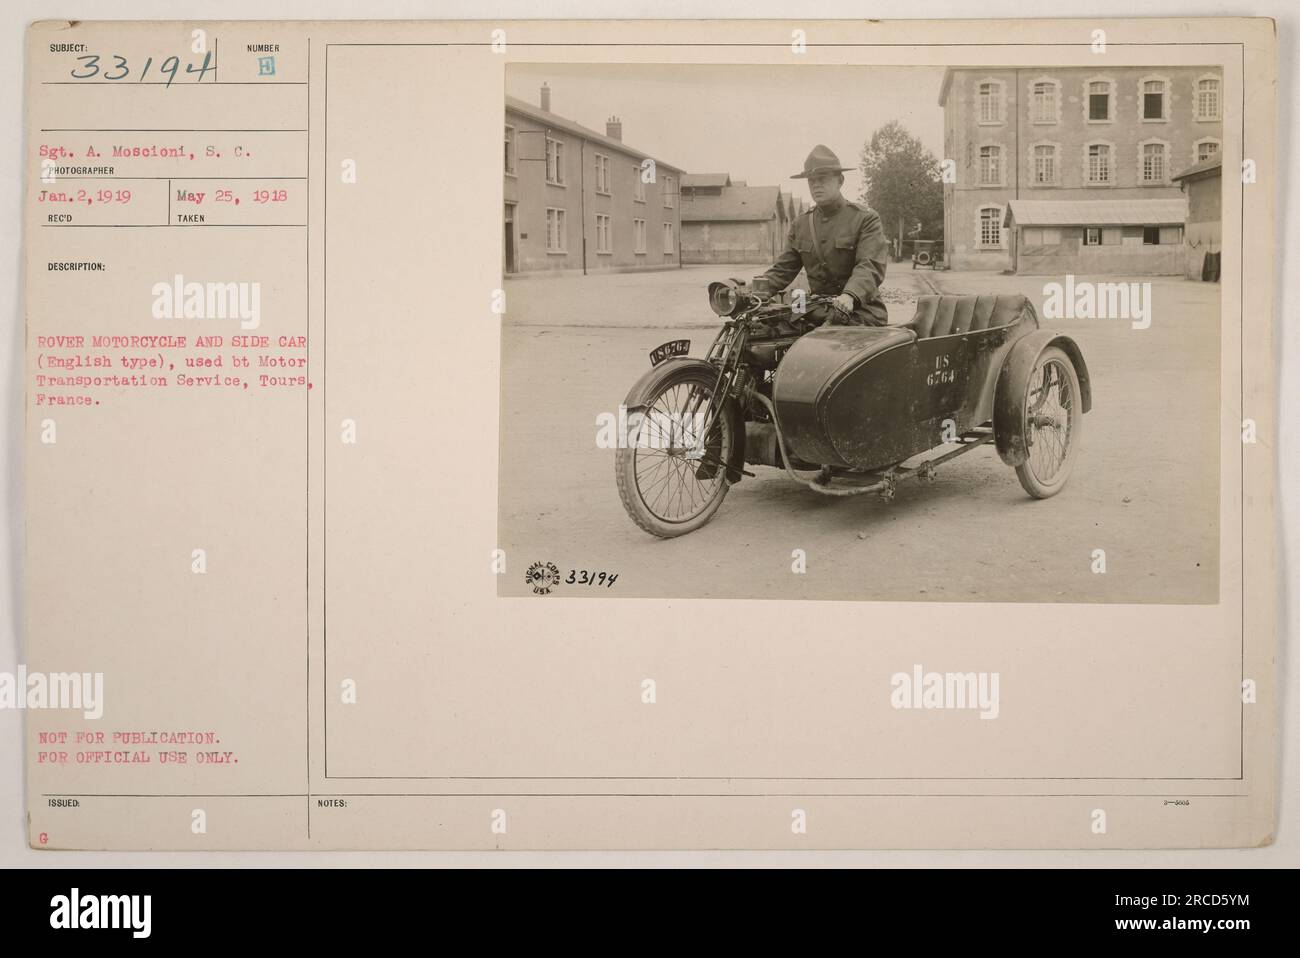 Sgt. A. Mosconi on a Rover motorcycle and sidecar (English type) used by the Motor Transportation Service in Tours, France on May 25, 1918. The photo was taken by a photographer on January 2, 1919. The image was not intended for public use but for official purposes only. Military document number 33/94 was assigned to this image. Stock Photo